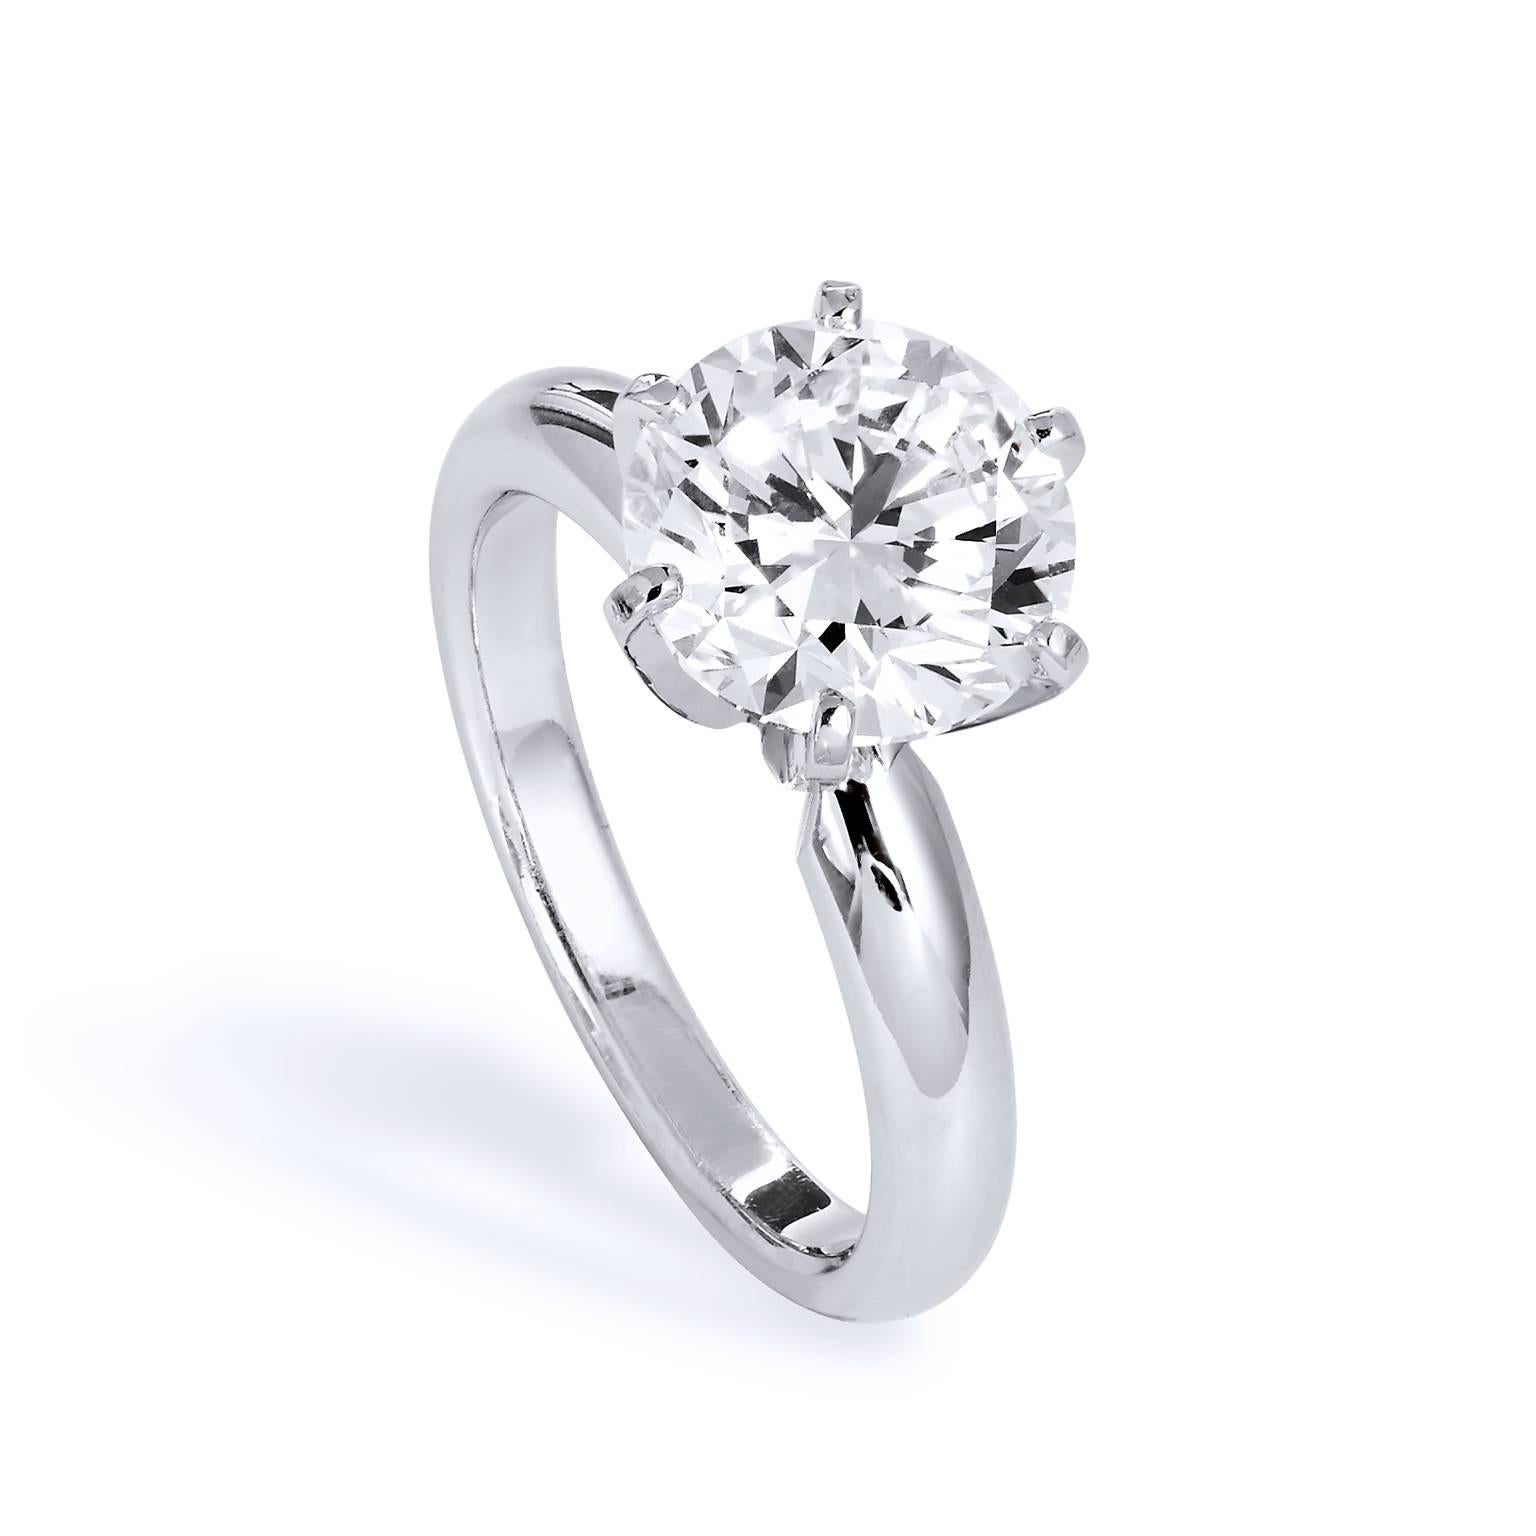 GIA Certified 3.04 Carat Diamond Platinum 4 Prong Solitaire Engagement Ring

Breathtaking natural beauty defines this gorgeous ring with its timeless design and its quality grade color and clarity. 
Handmade in platinum, this ring features a 3.04ct